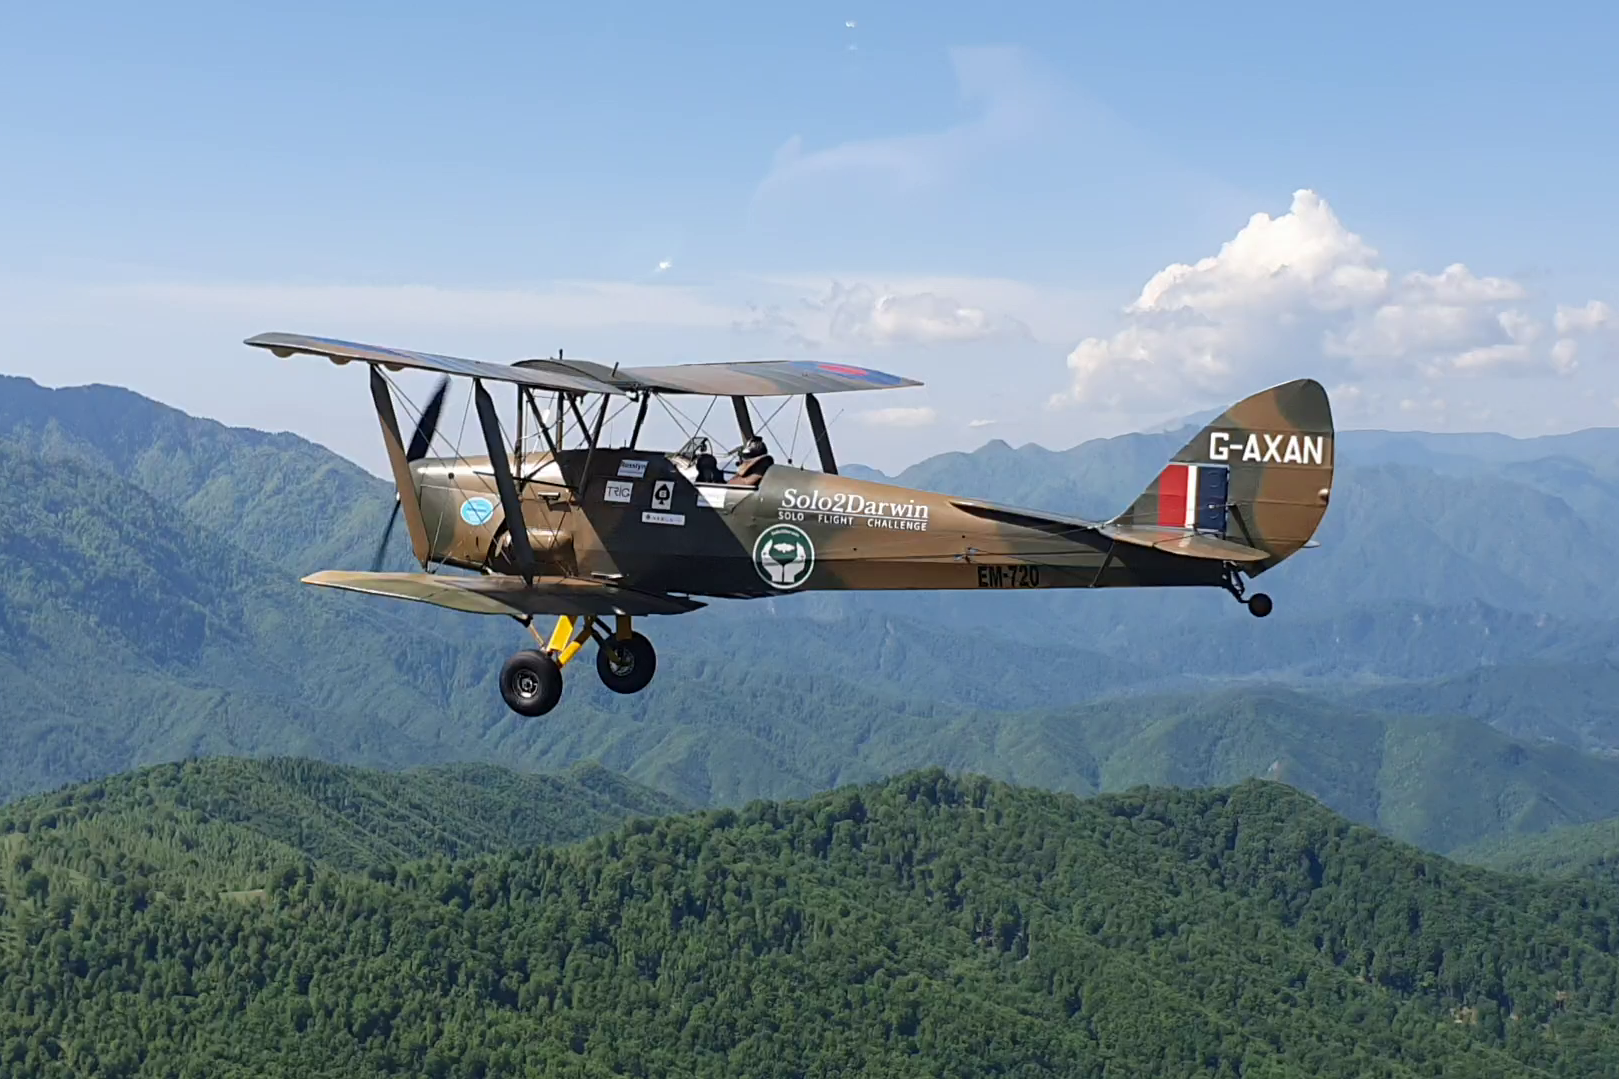 A Tiger Moth plane with 'Solo2Darwin' on the side flies over lush green hillsides